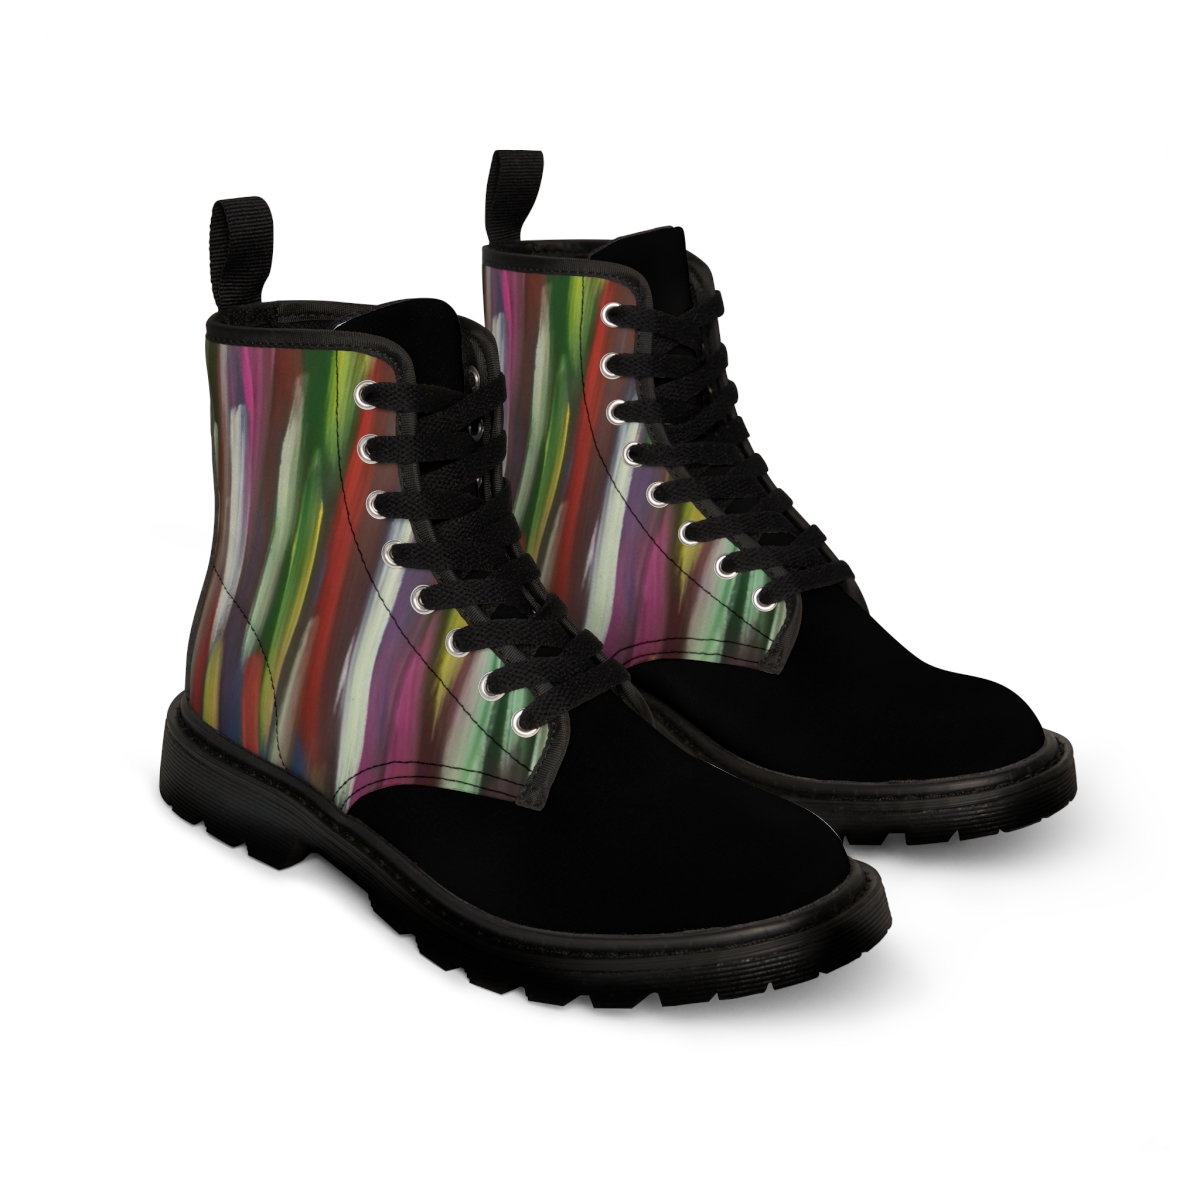 Manly Men's Canvas Boots product thumbnail image